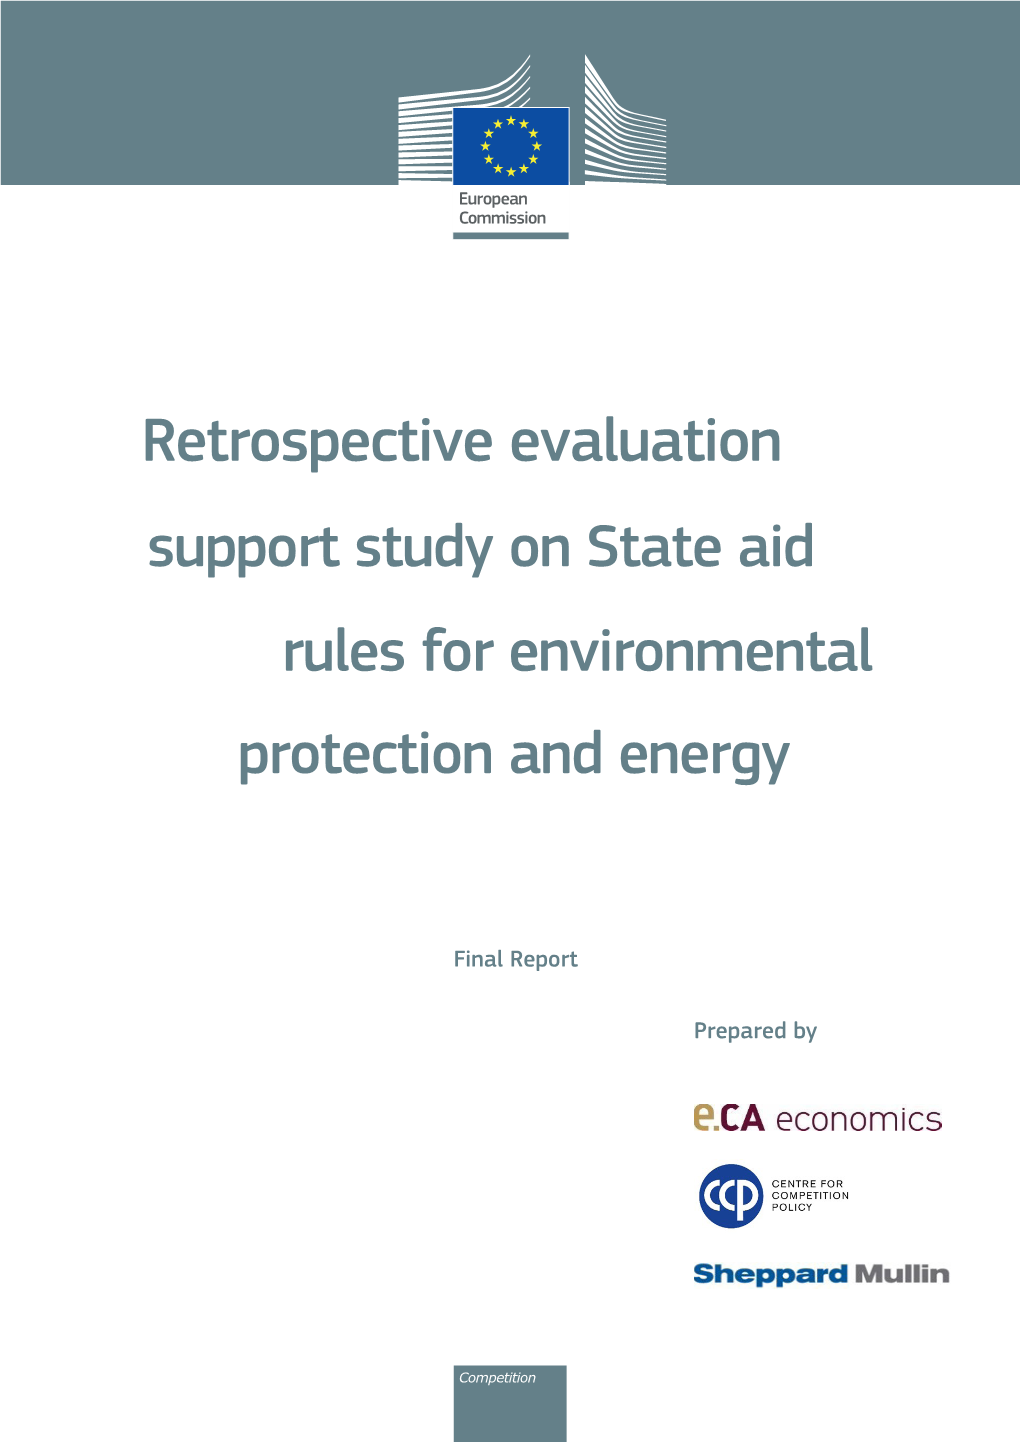 Retrospective Evaluation Support Study on State Aid Rules for Environmental Protection and Energy